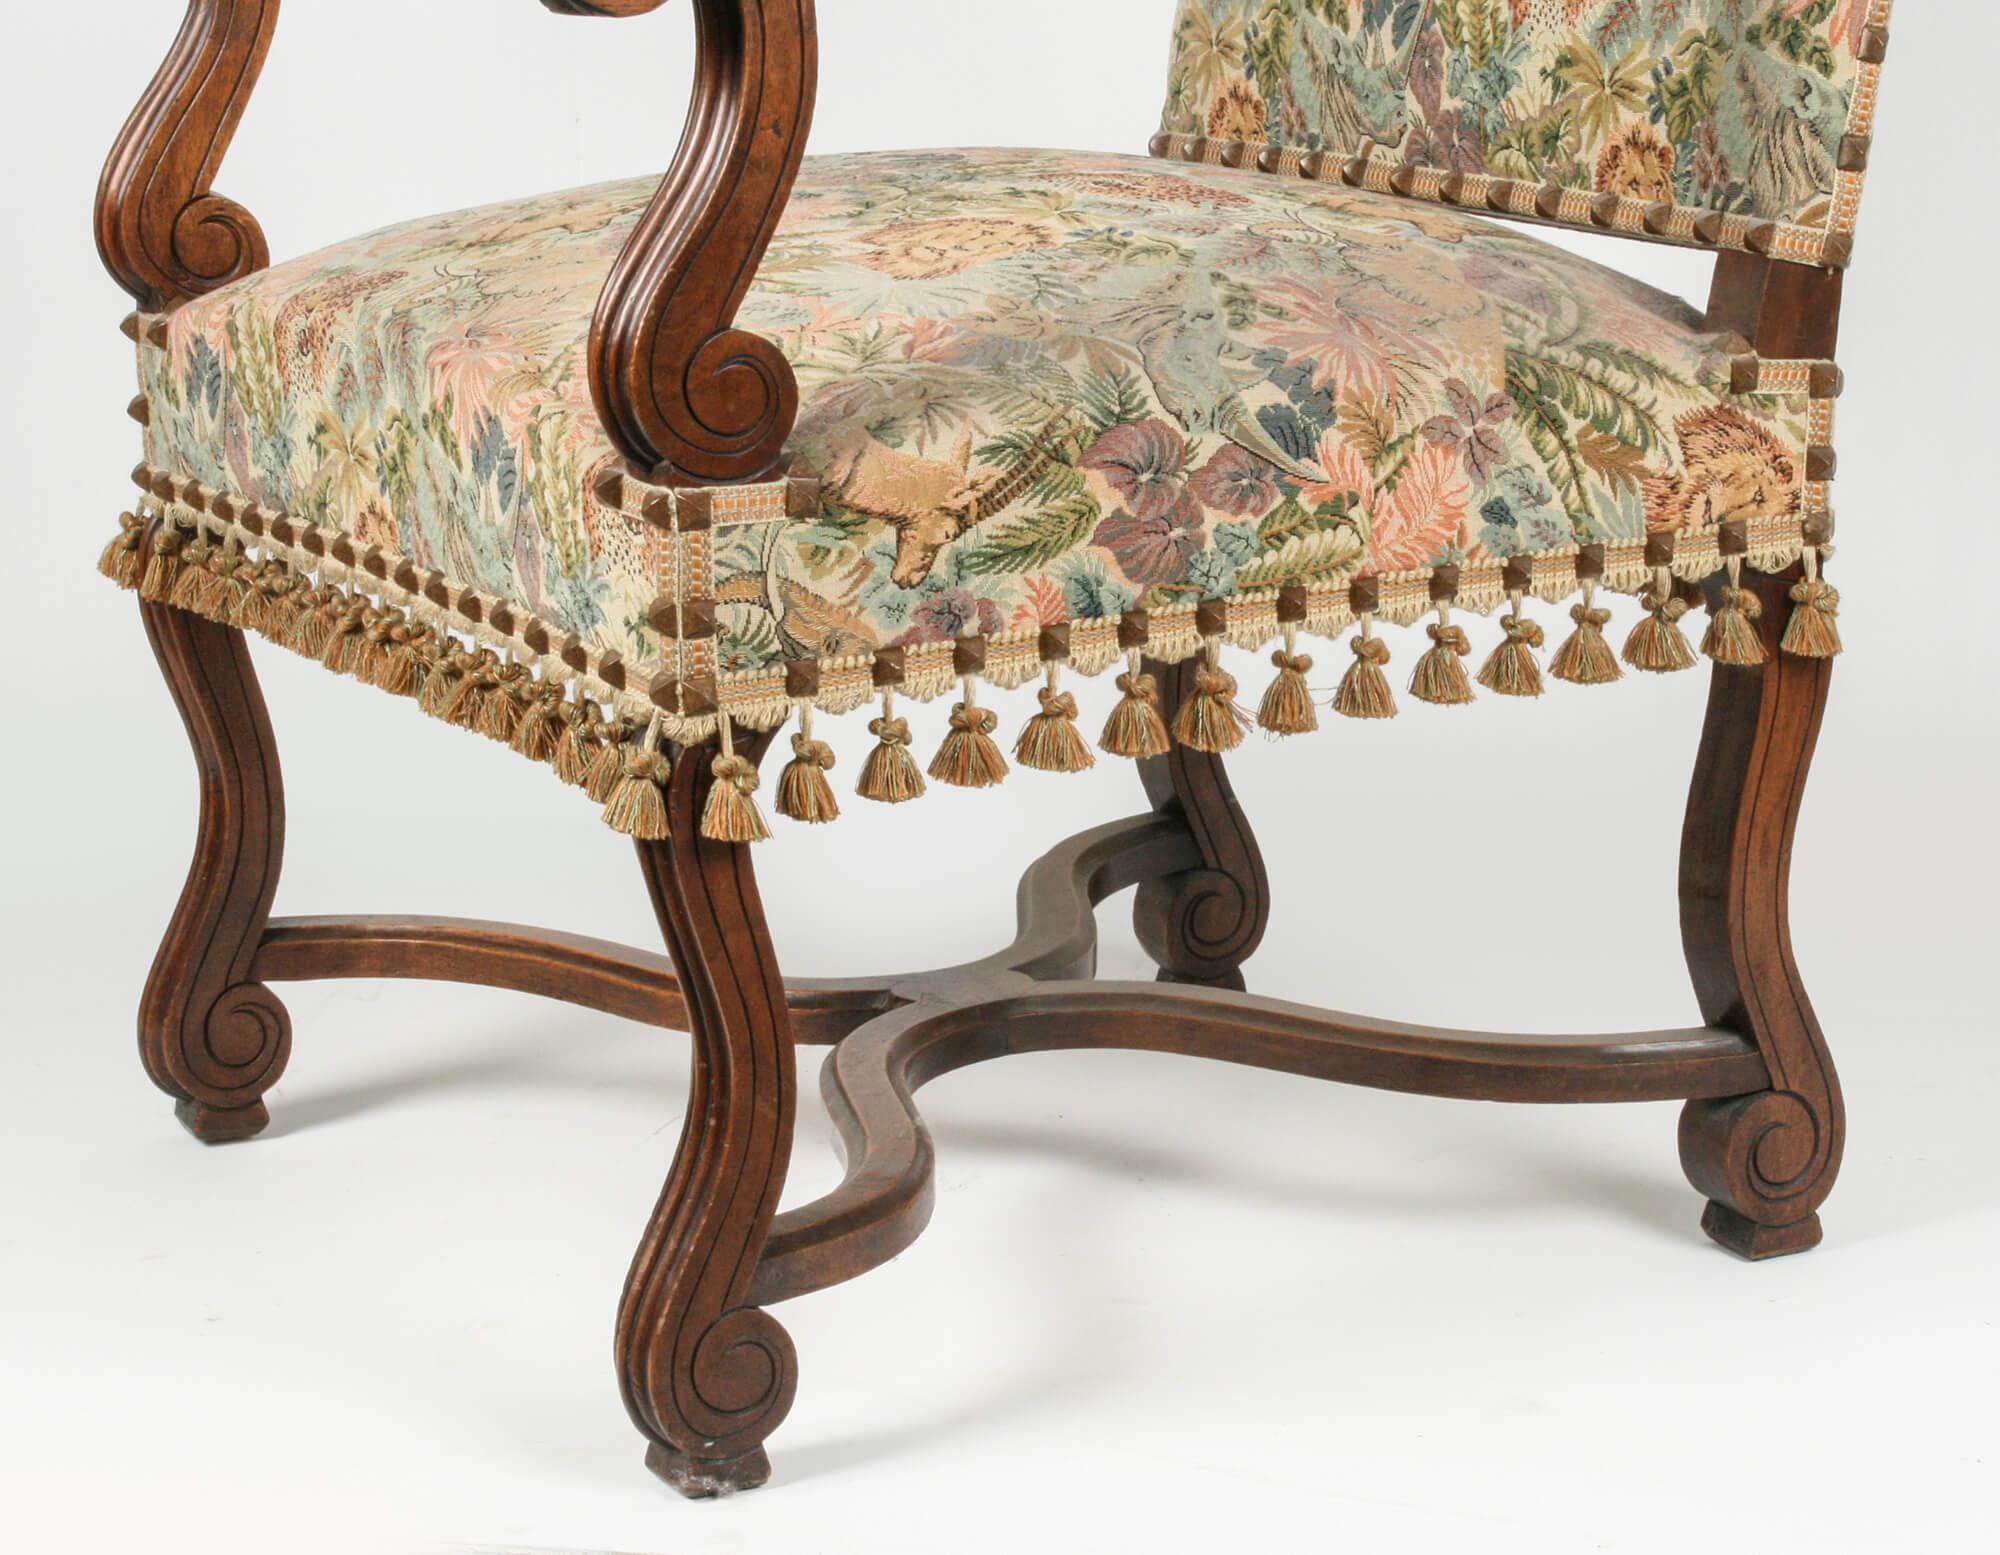 Upholstery 19th Century French Armchair Louis XIV Style